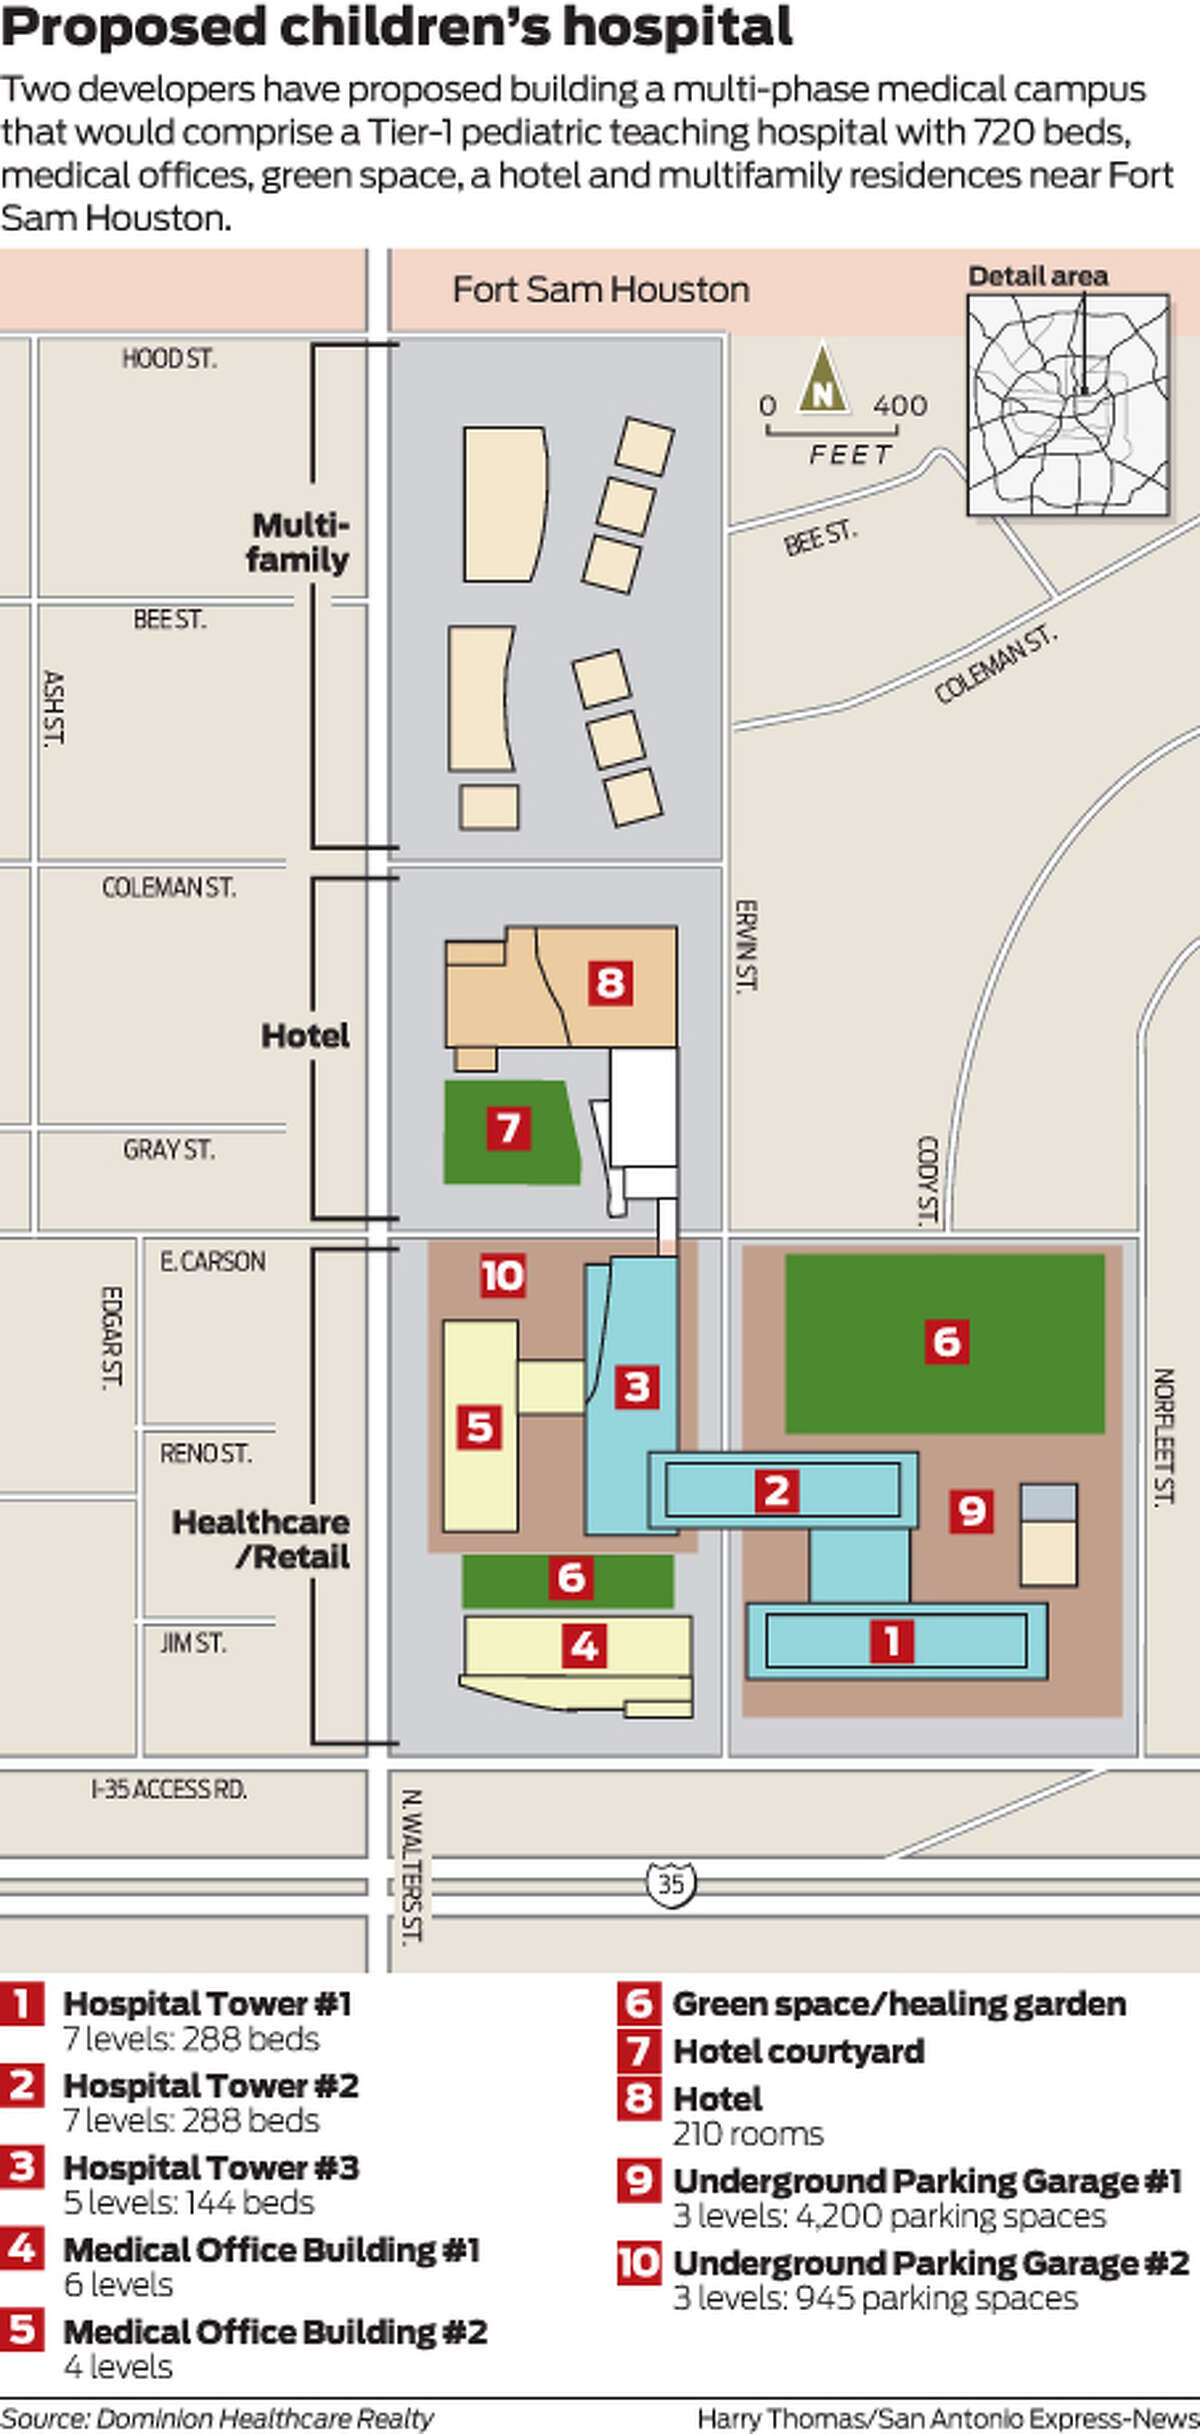 Two developers have proposed building a multi-phase medical campus that would comprise a Tier-1 pediatric teaching hospital with 720 beds, medical offices, green space, a hotel and multifamily residences near Fort Sam Houston.